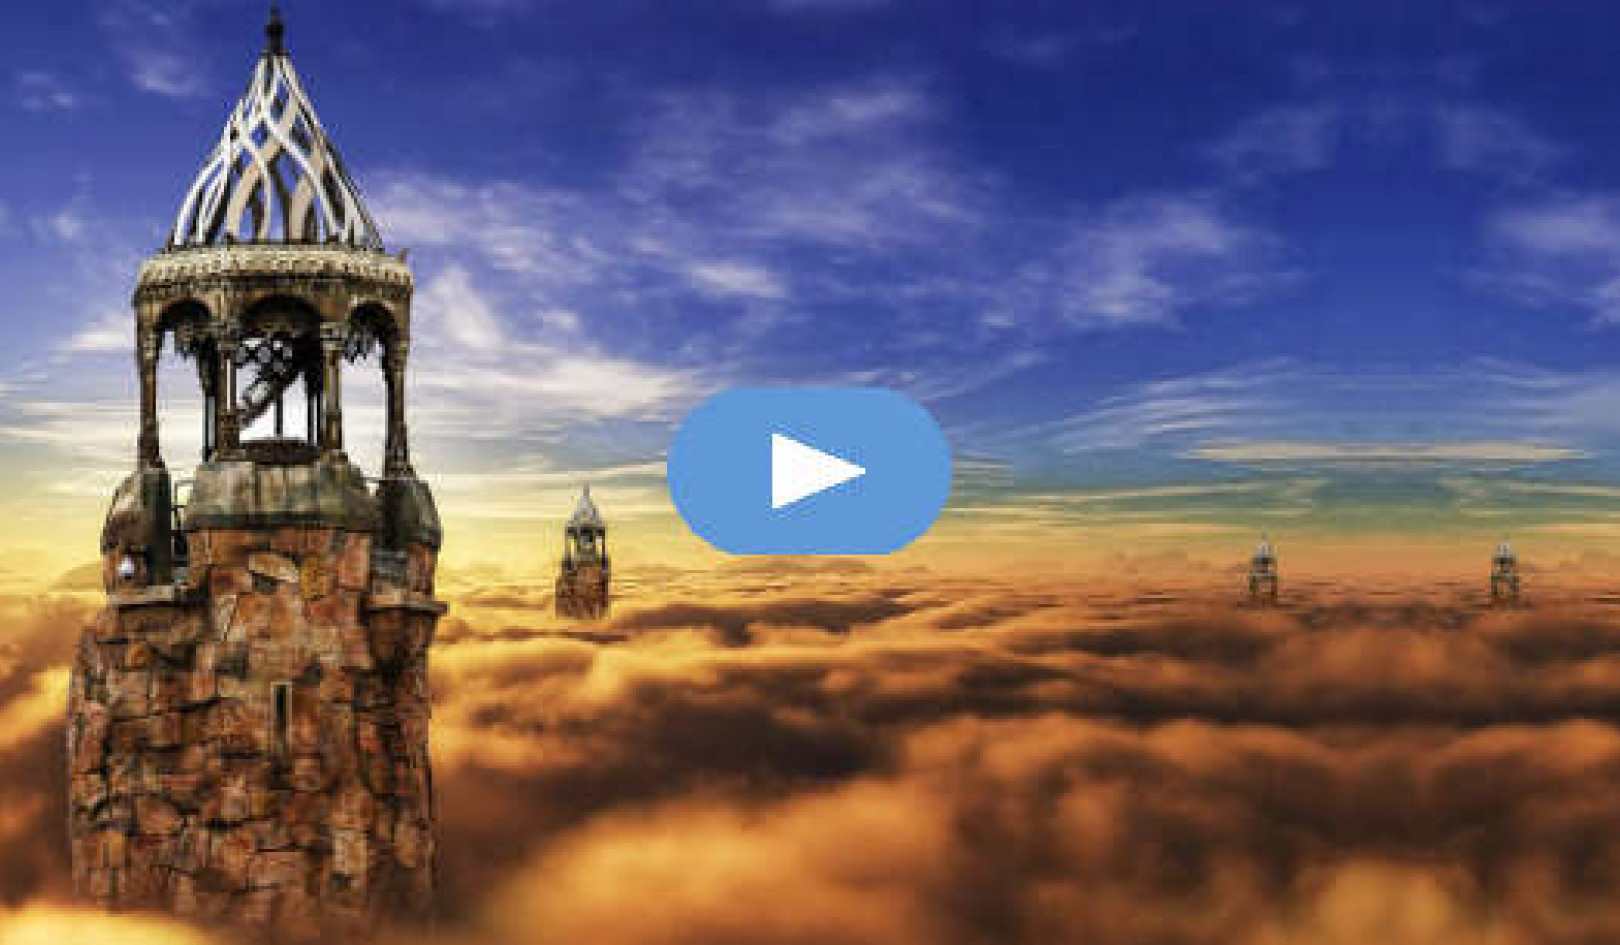 Close Your Eyes So You Can See: Traveling Between Worlds and Seeking to Reconnect (Video)